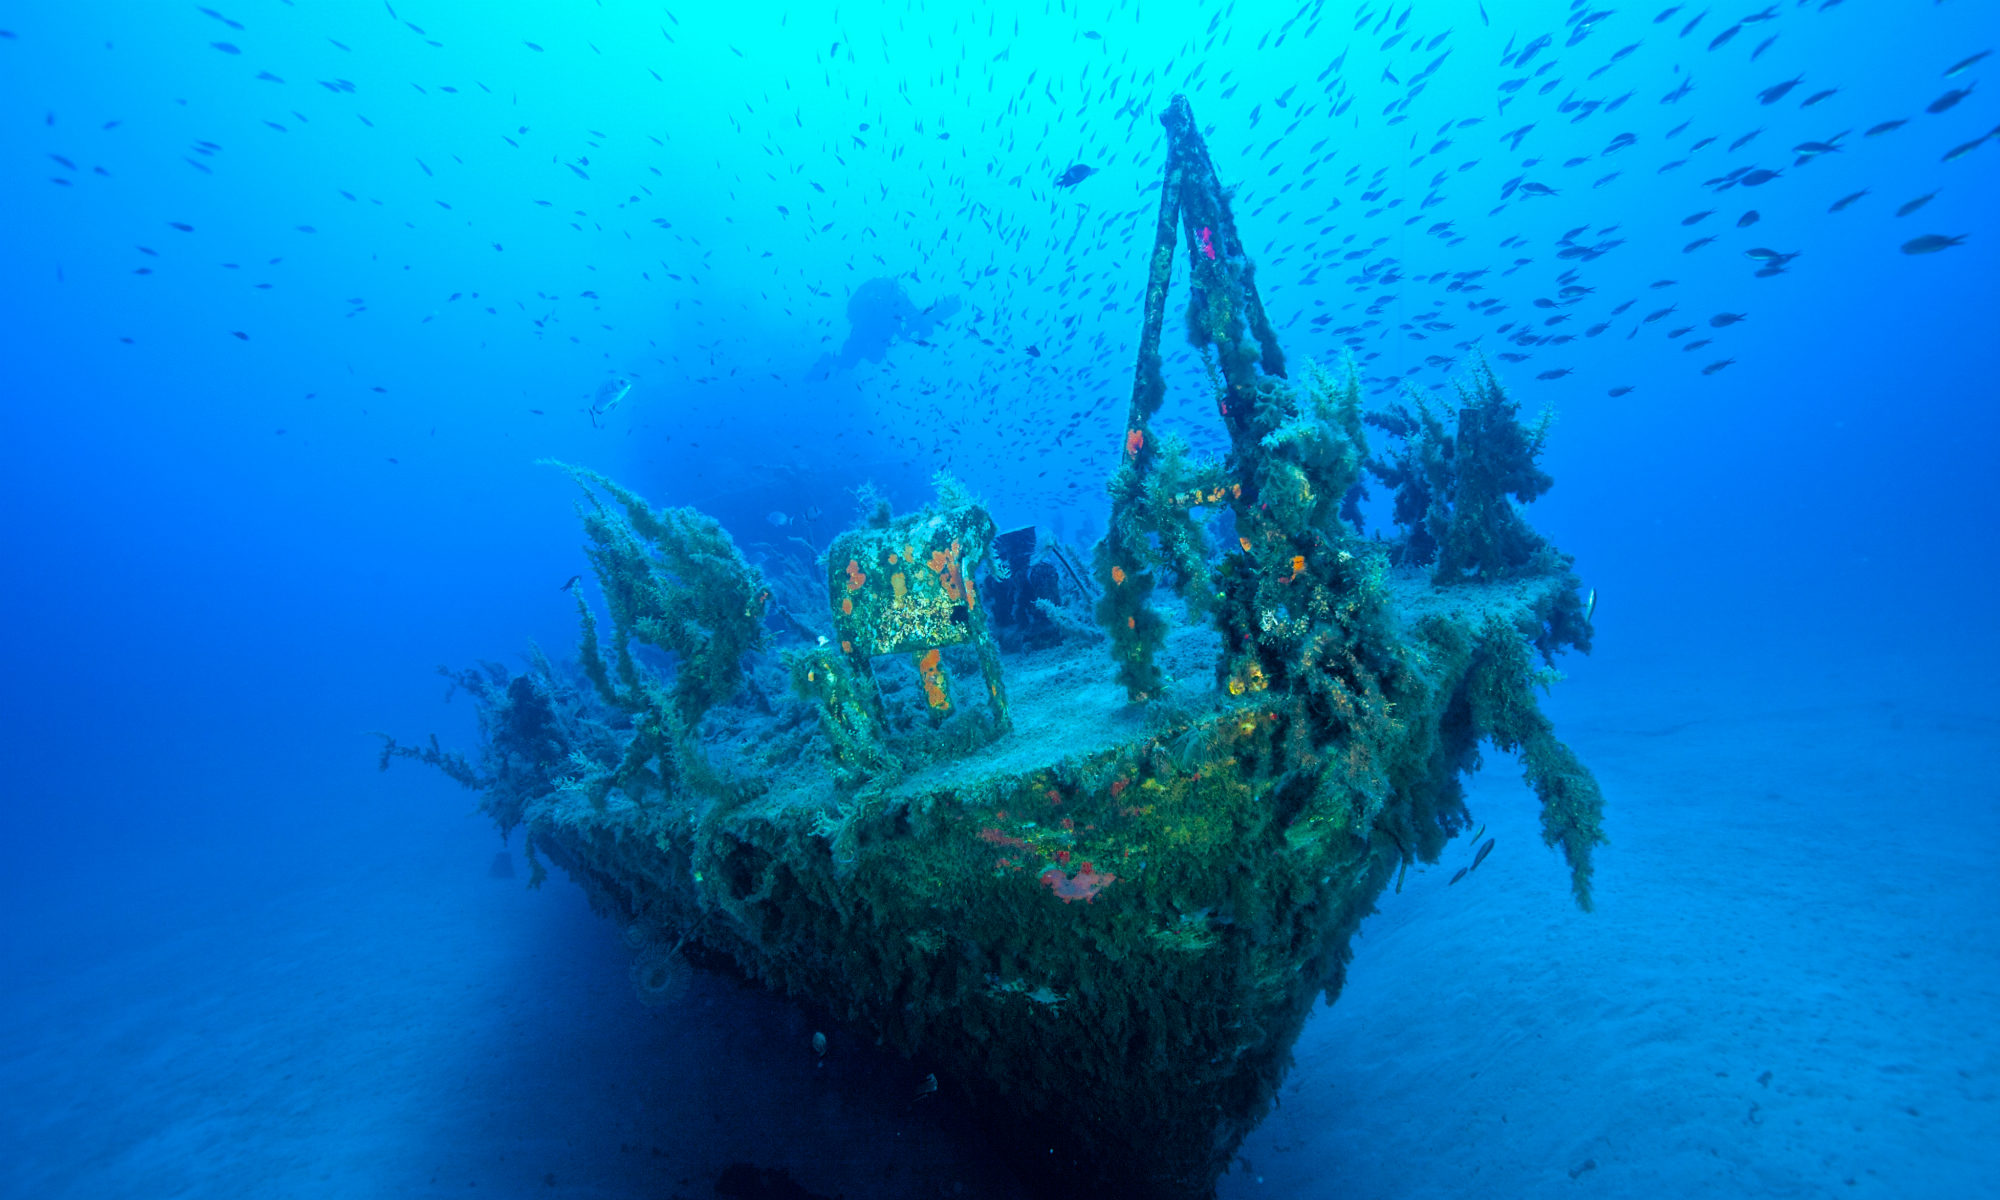 One of Malta’s many sunken shipwrecks is visible on the seabed.